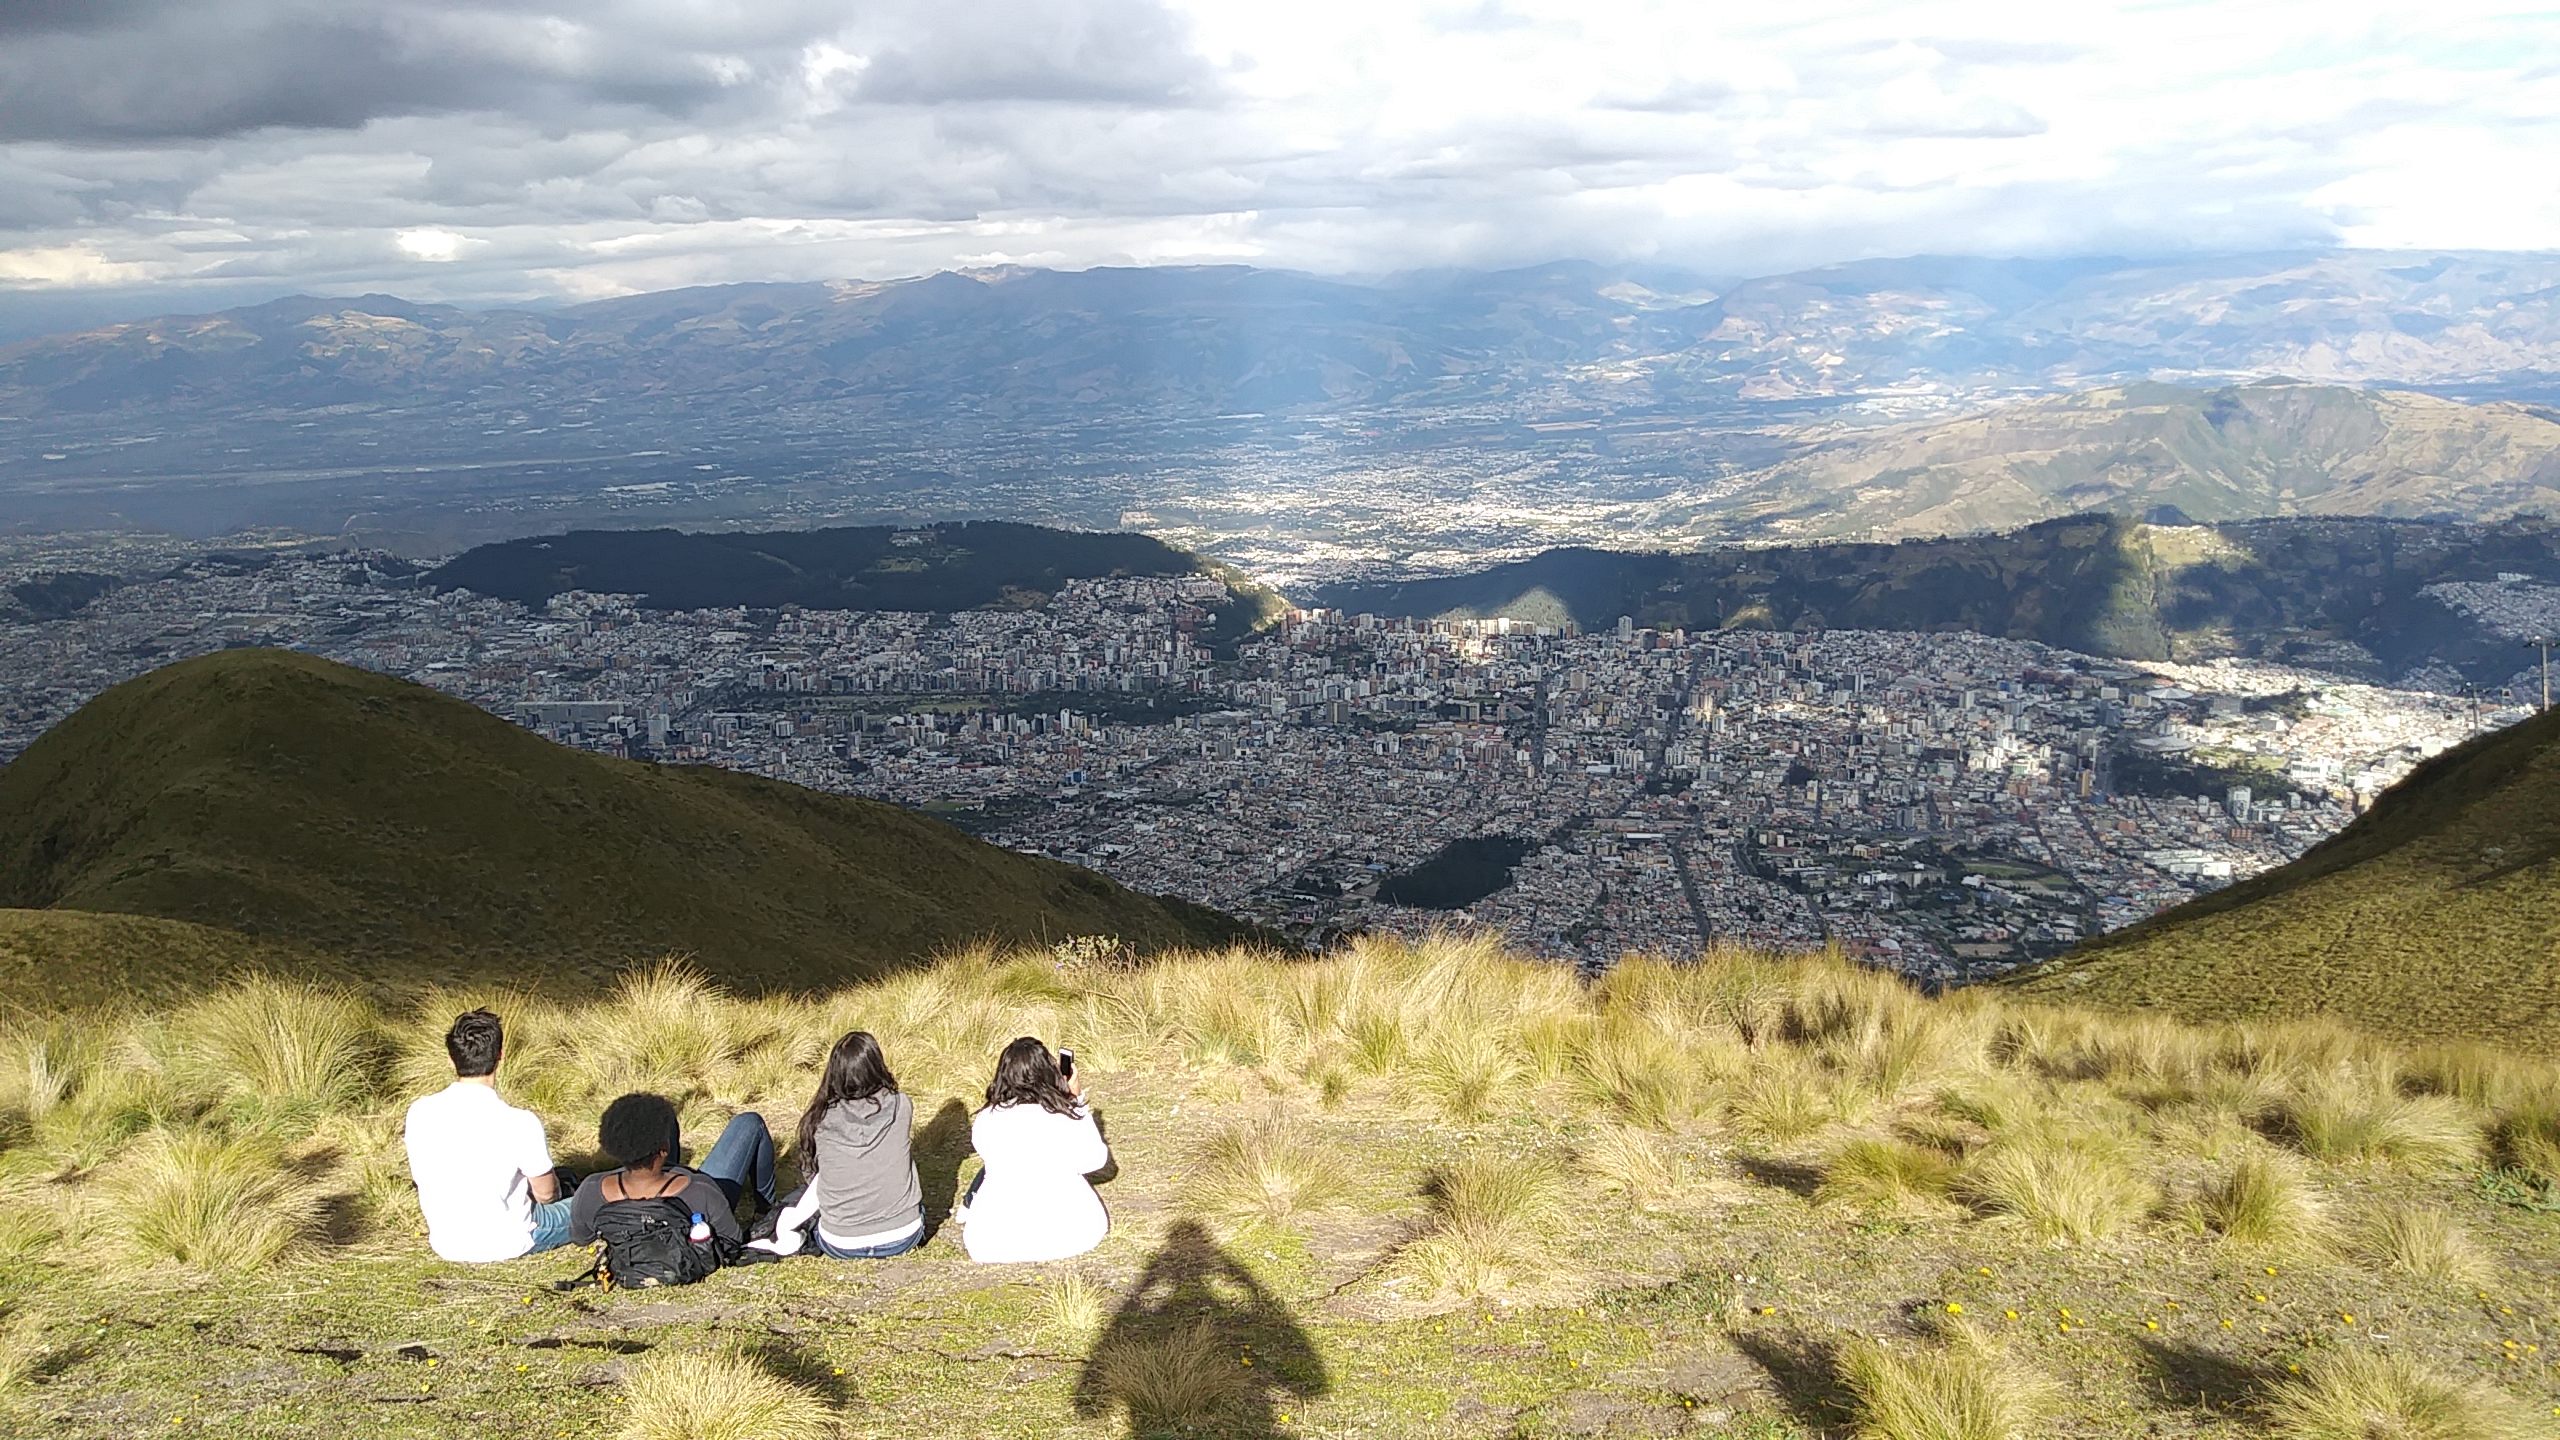 Four students sitting on a grassy hill overlooking a sprawling city in Spain